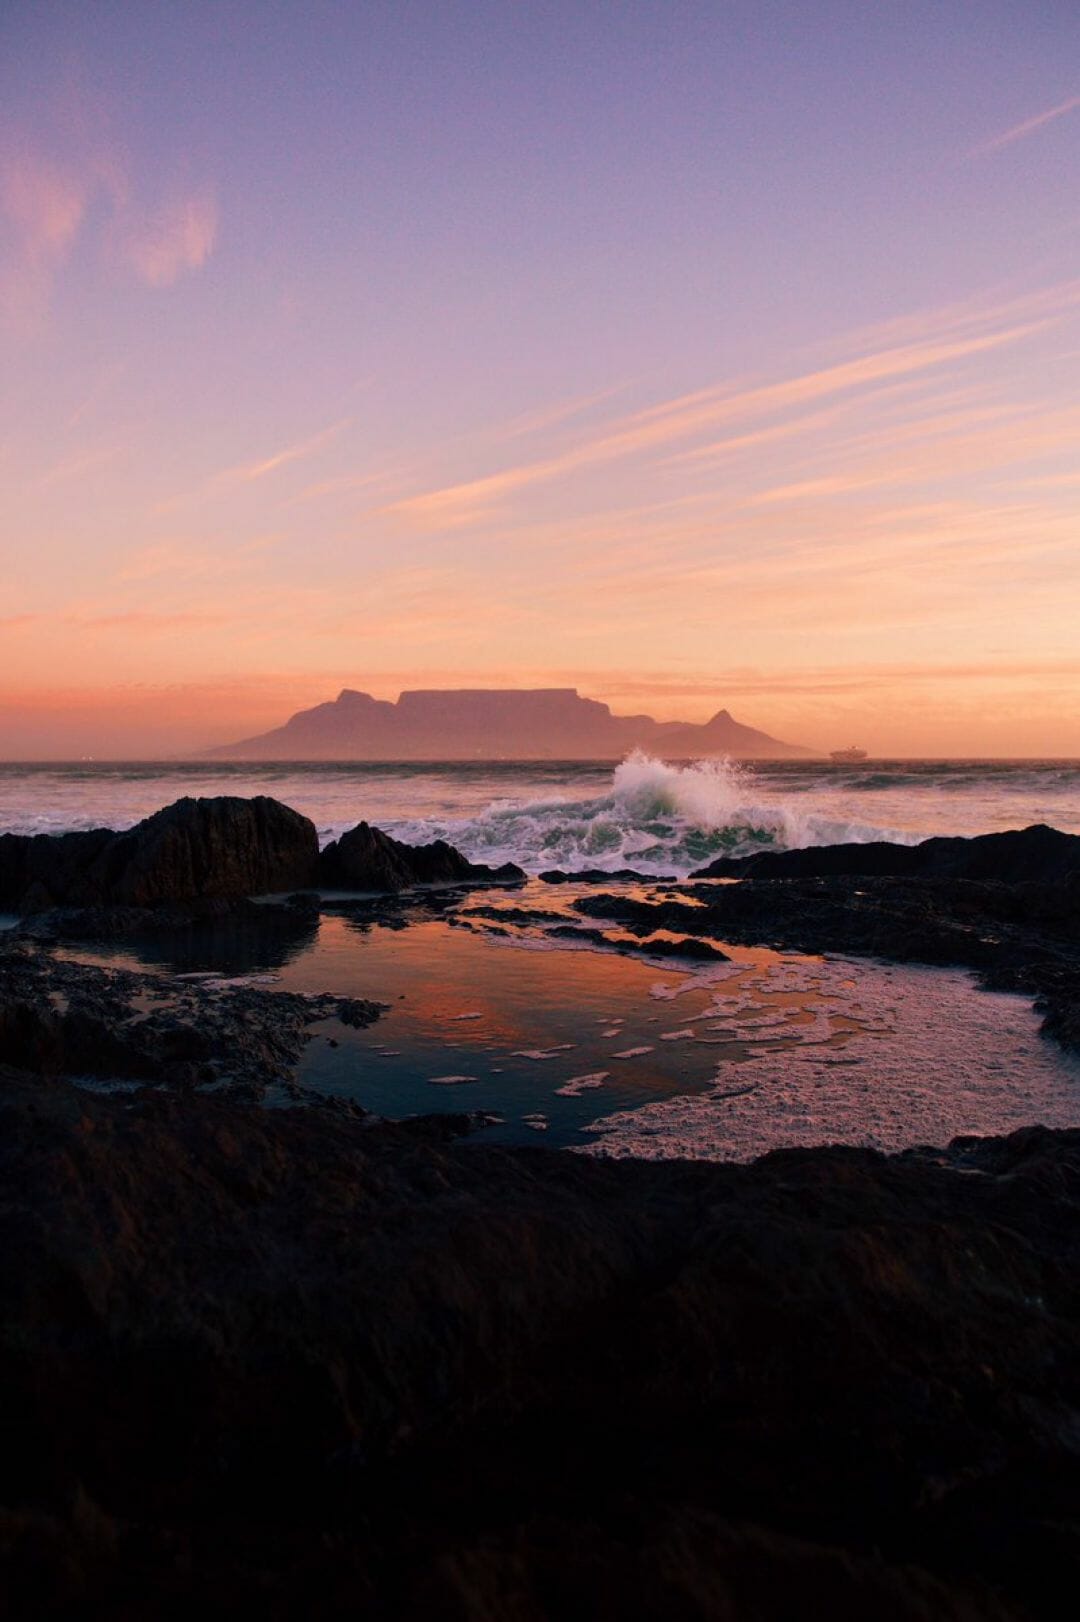 Cape Town Wallpapers